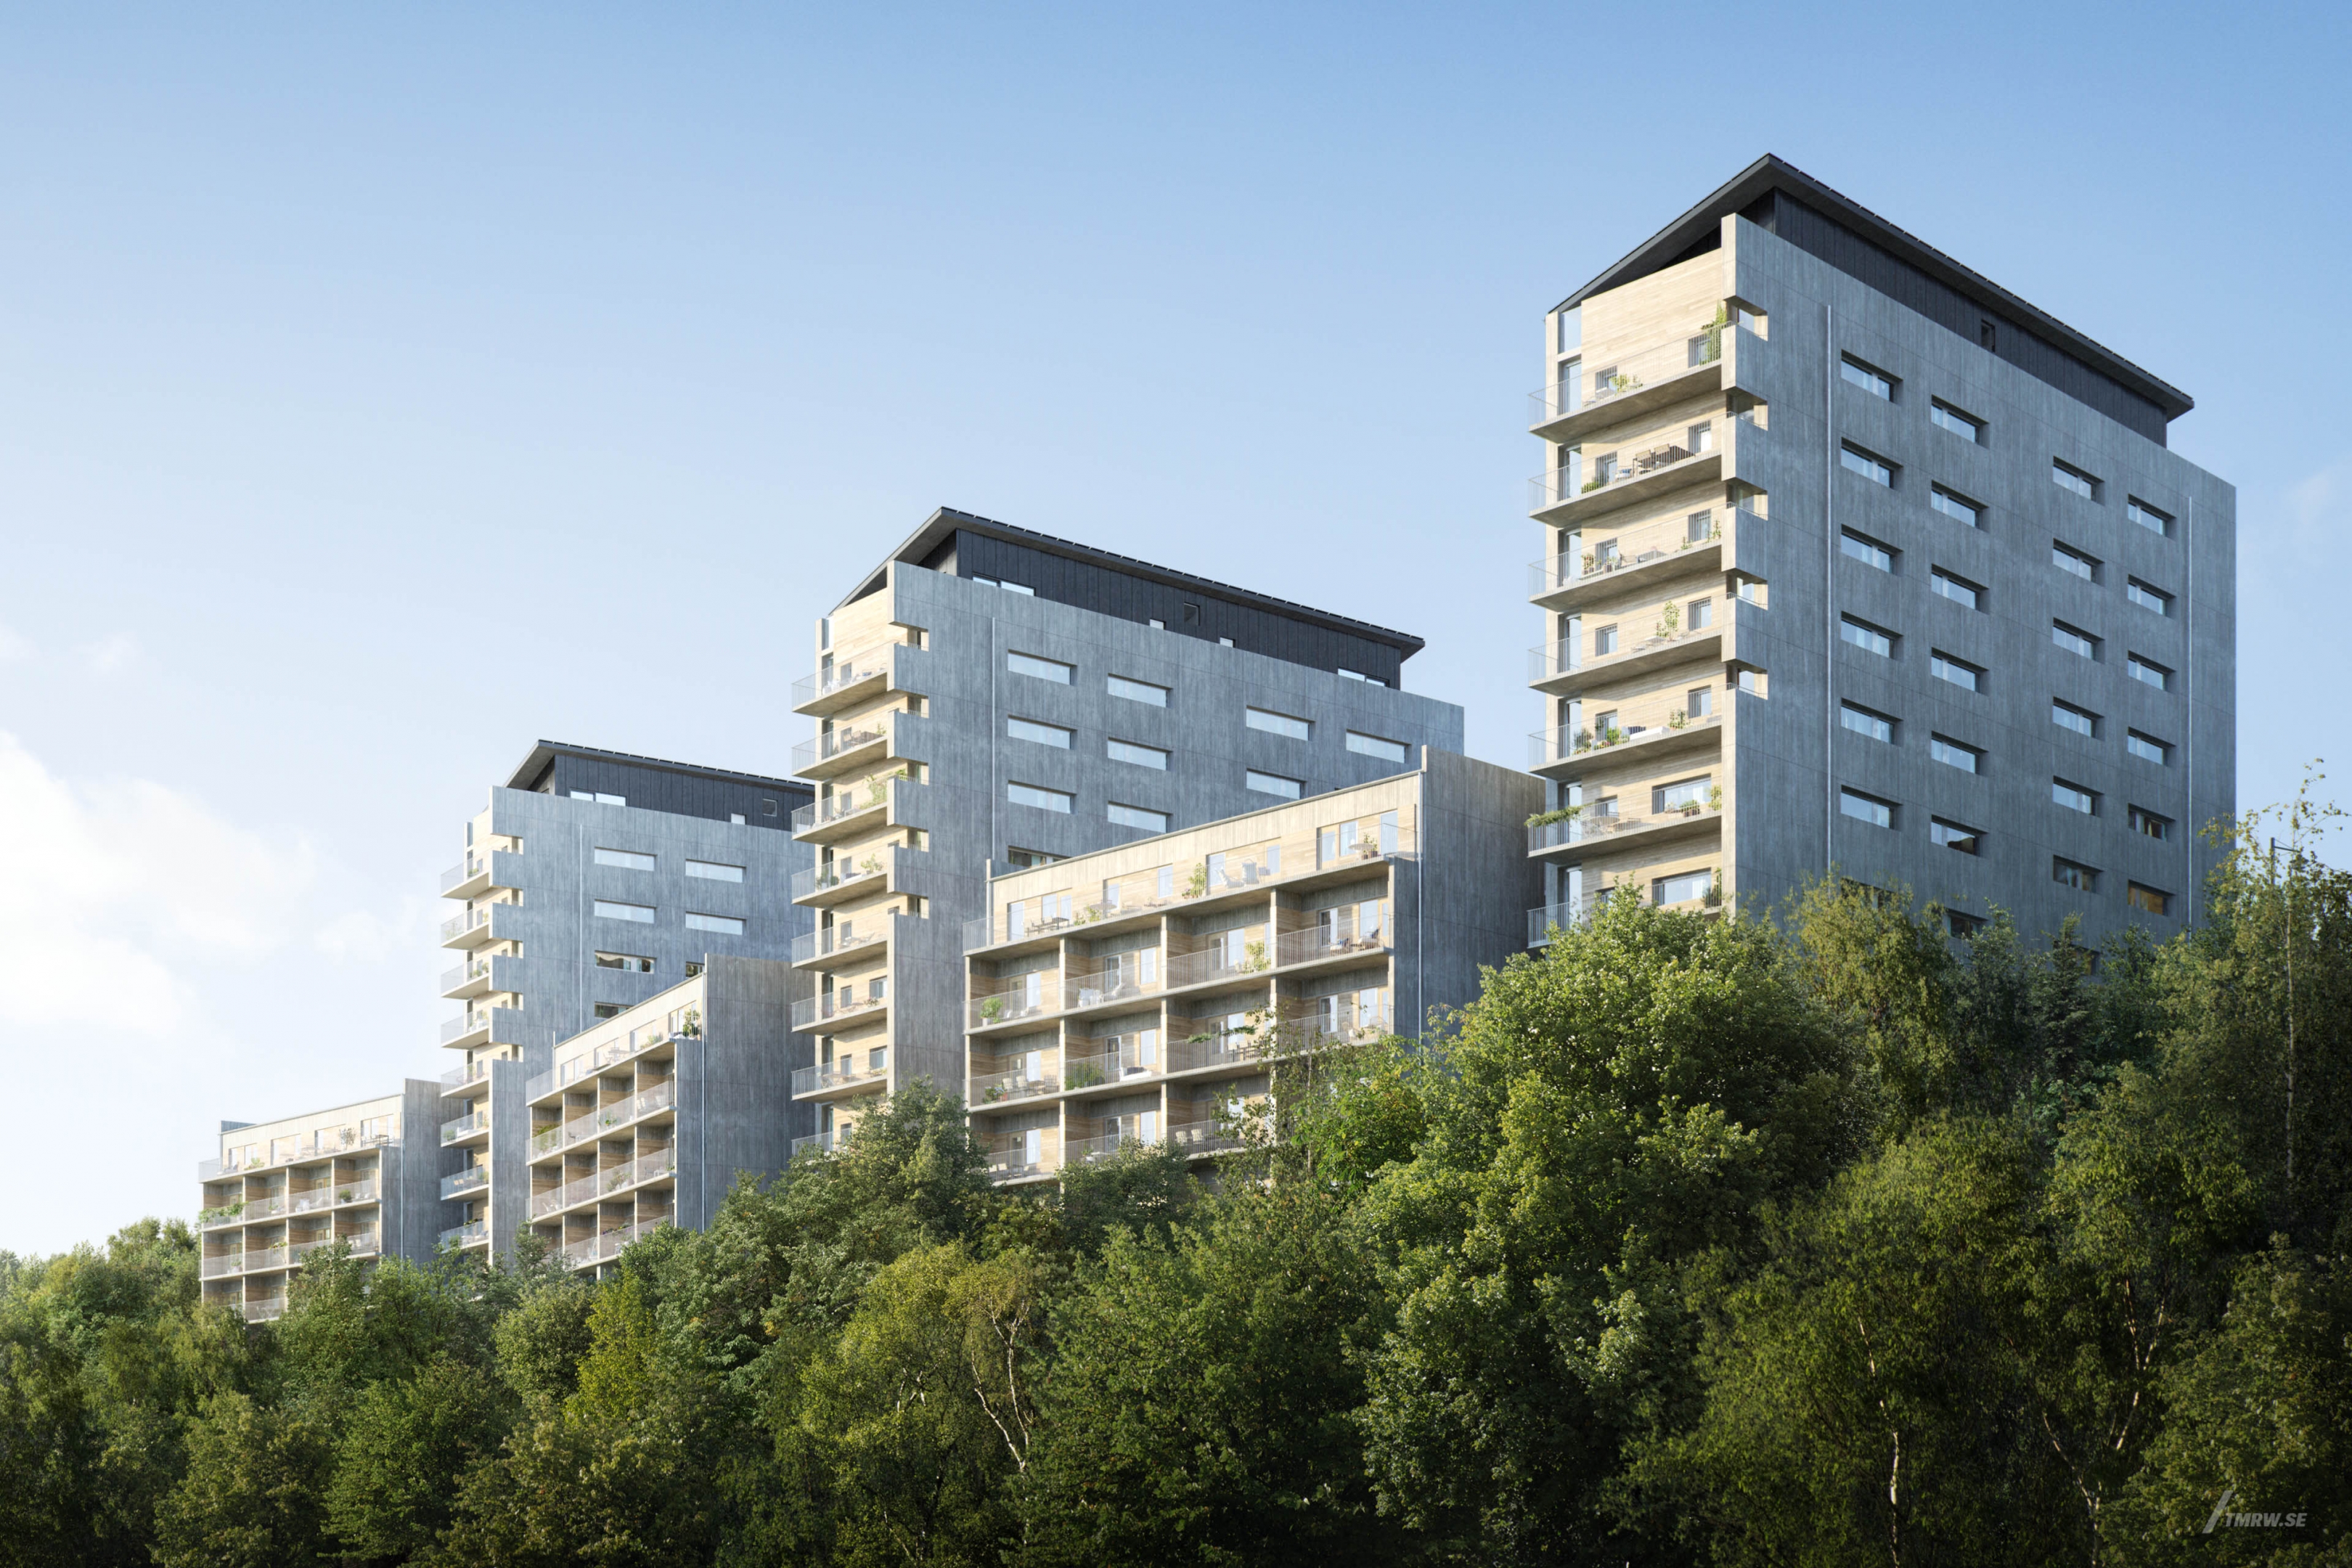 Architectural visualization of Viva for Riksbyggen, residential buildings in green environment